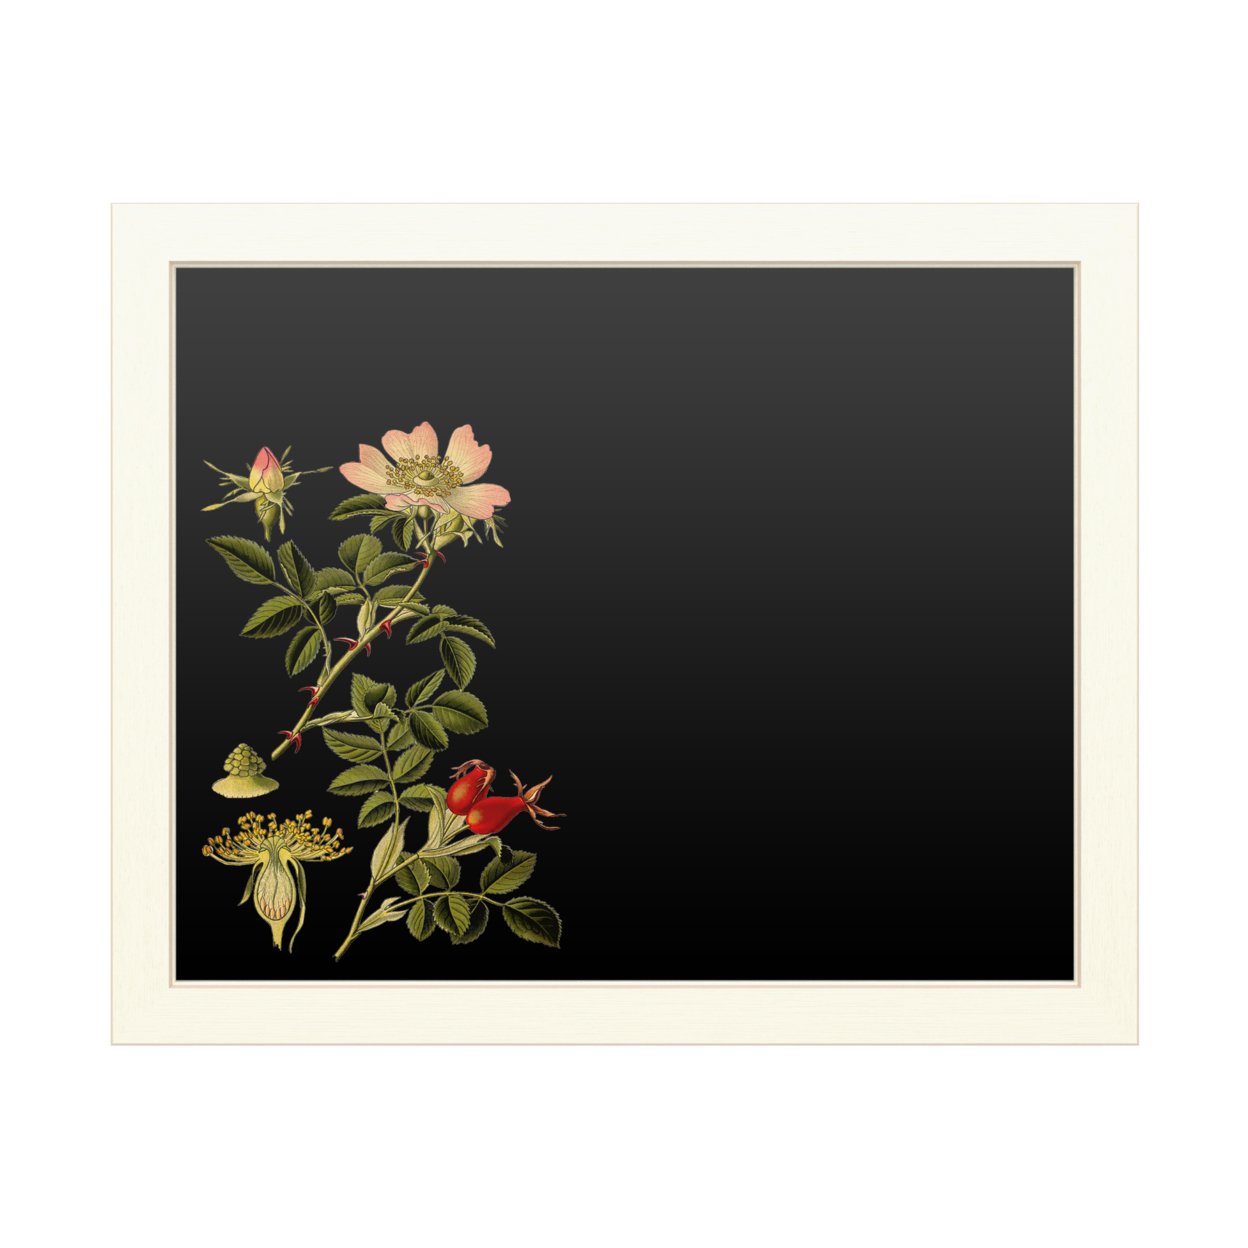 16 X 20 Chalk Board With Printed Artwork - Vision Studio Midnight Botanical I White Board - Ready To Hang Chalkboard